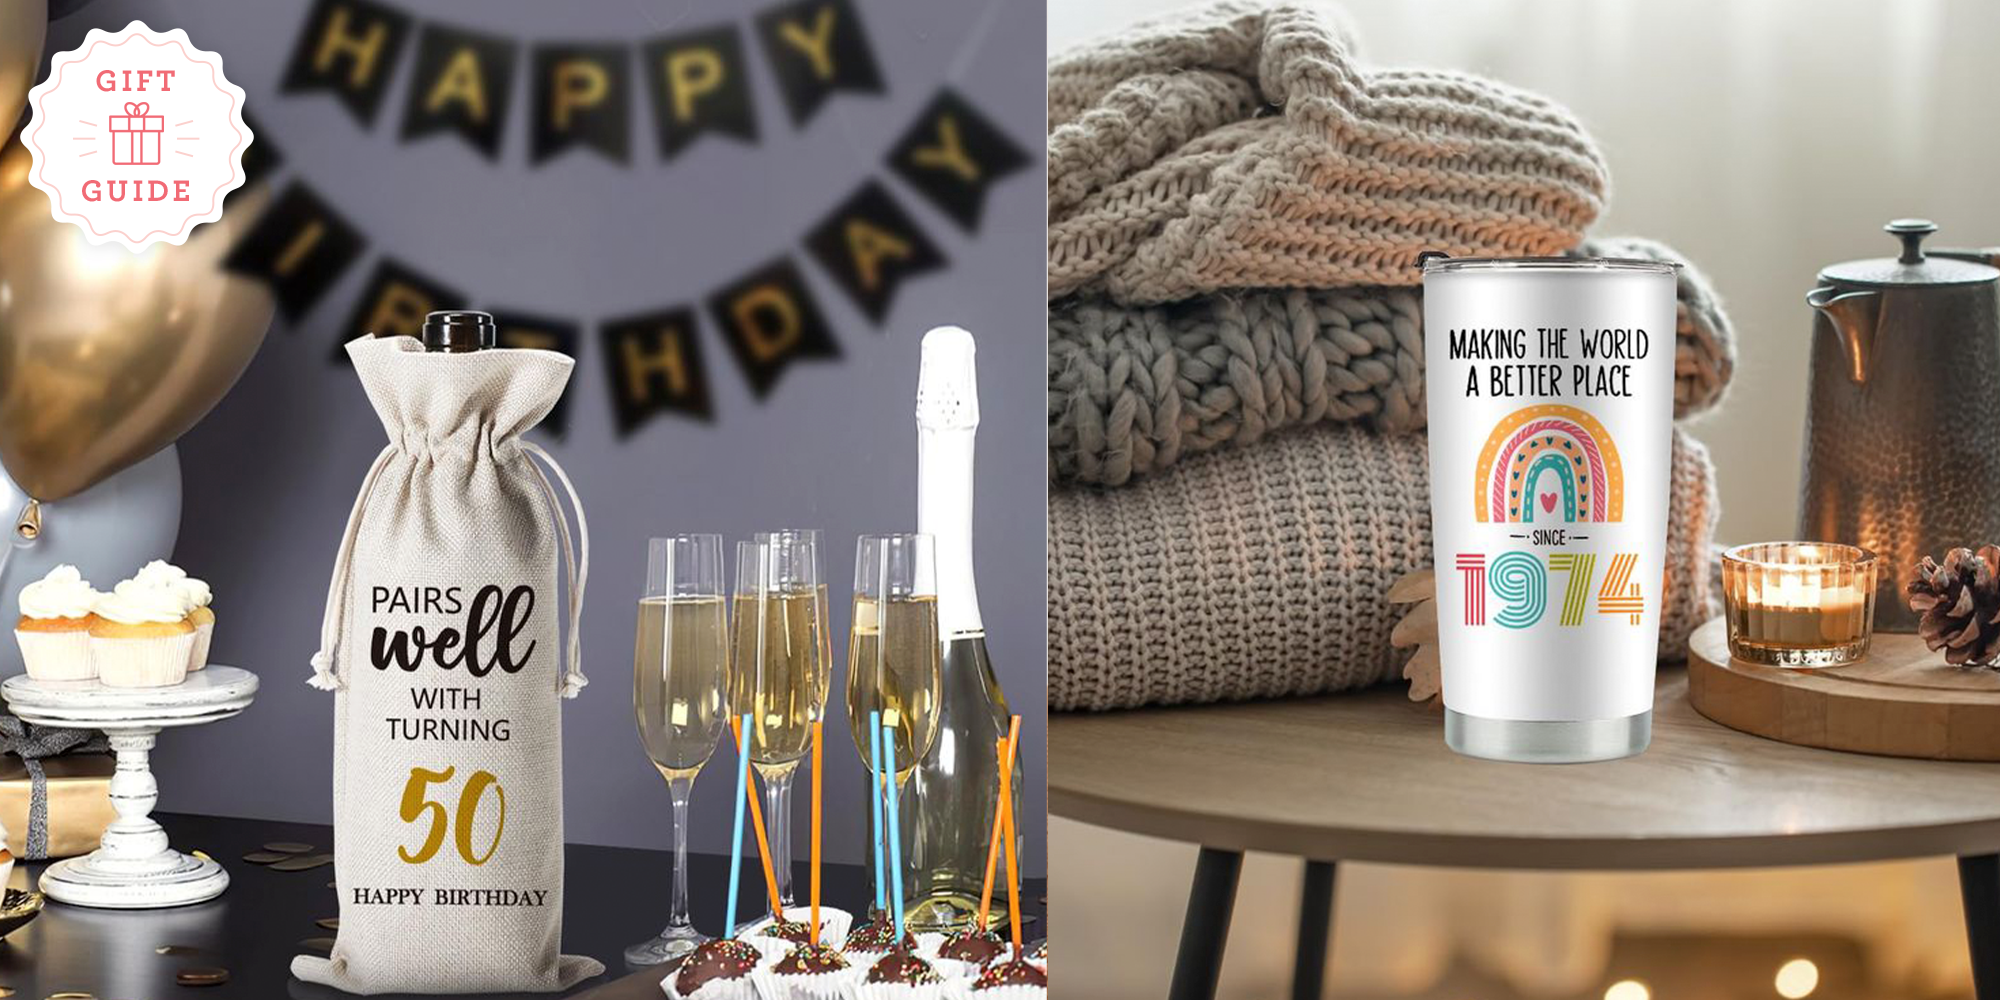 5 Best Birthday Gifts for Girlfriend - Surprise Her with Something Special  – The Good Road